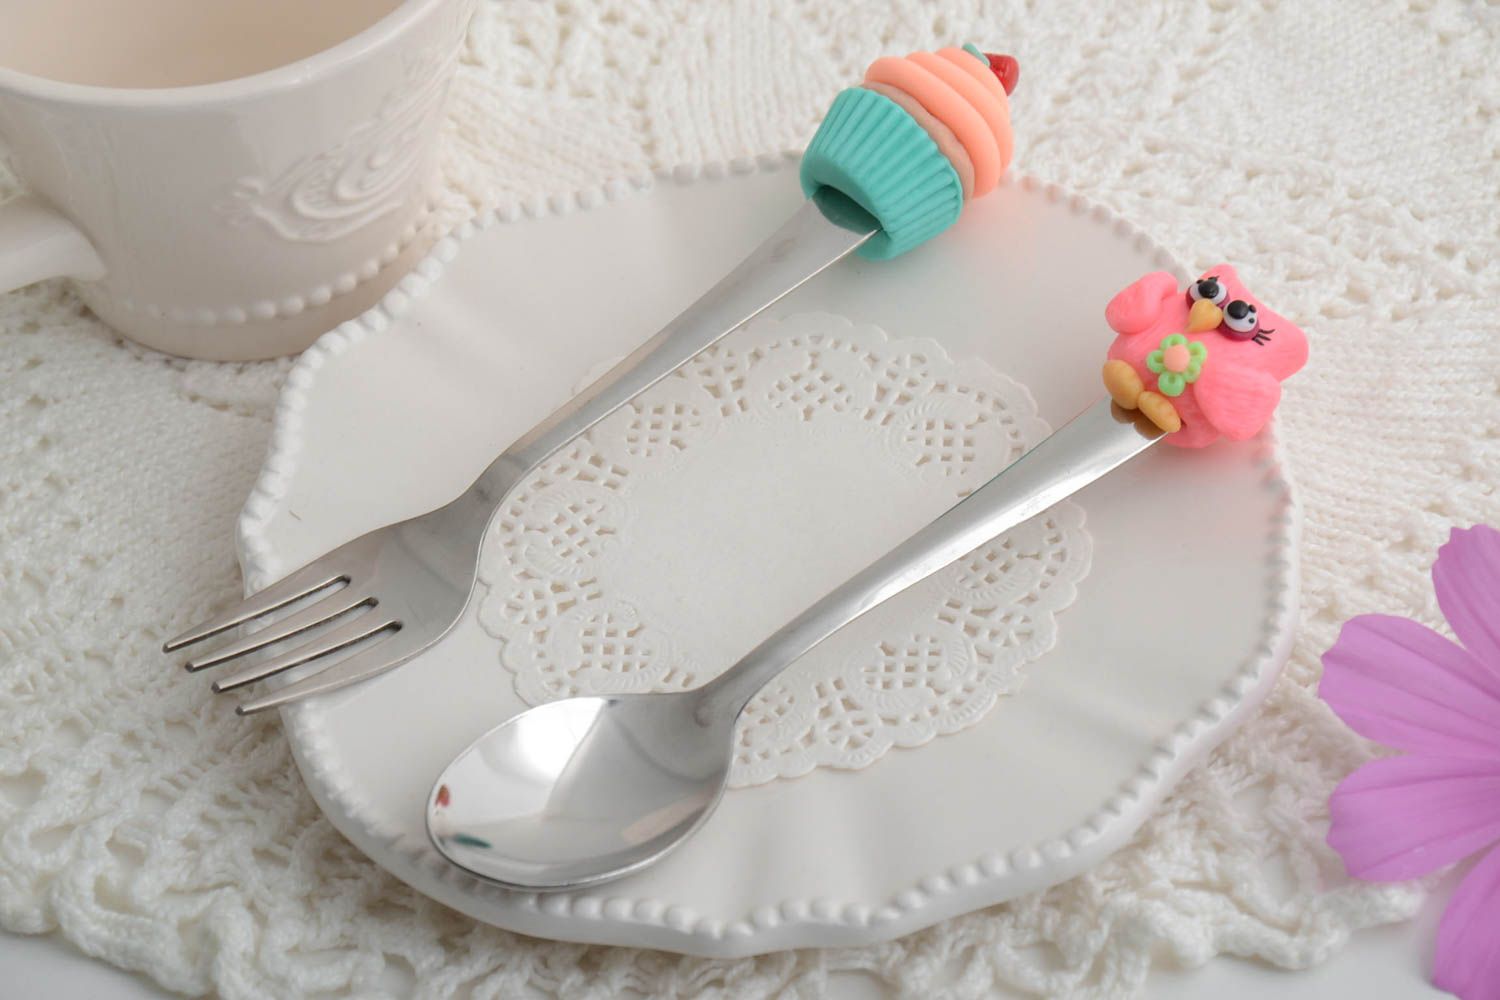 Cutlery for family designer set of handmade fork and spoon interior ideas photo 1